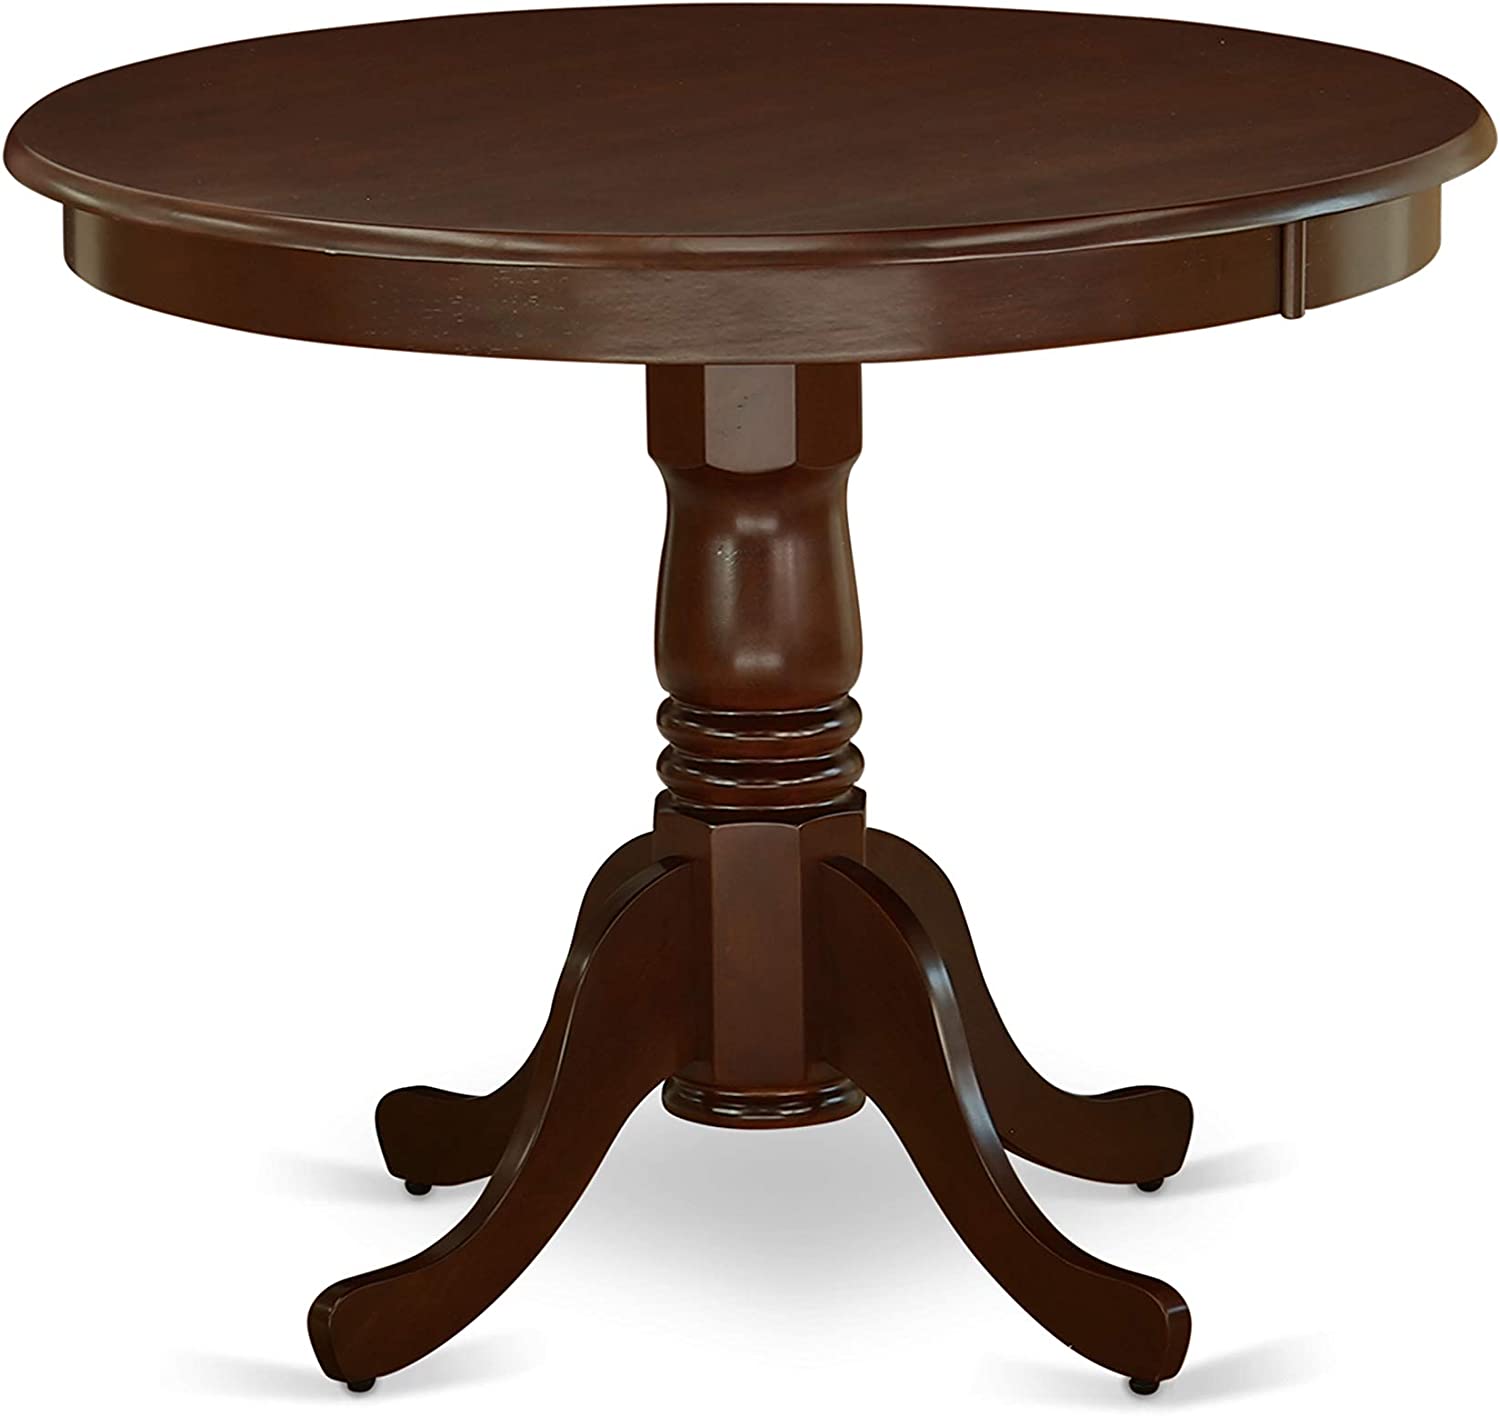 East West Furniture 3Pc Rounded 36 Inch Dinner Table And Two Wood Seat Dining Chairs, Mahogany